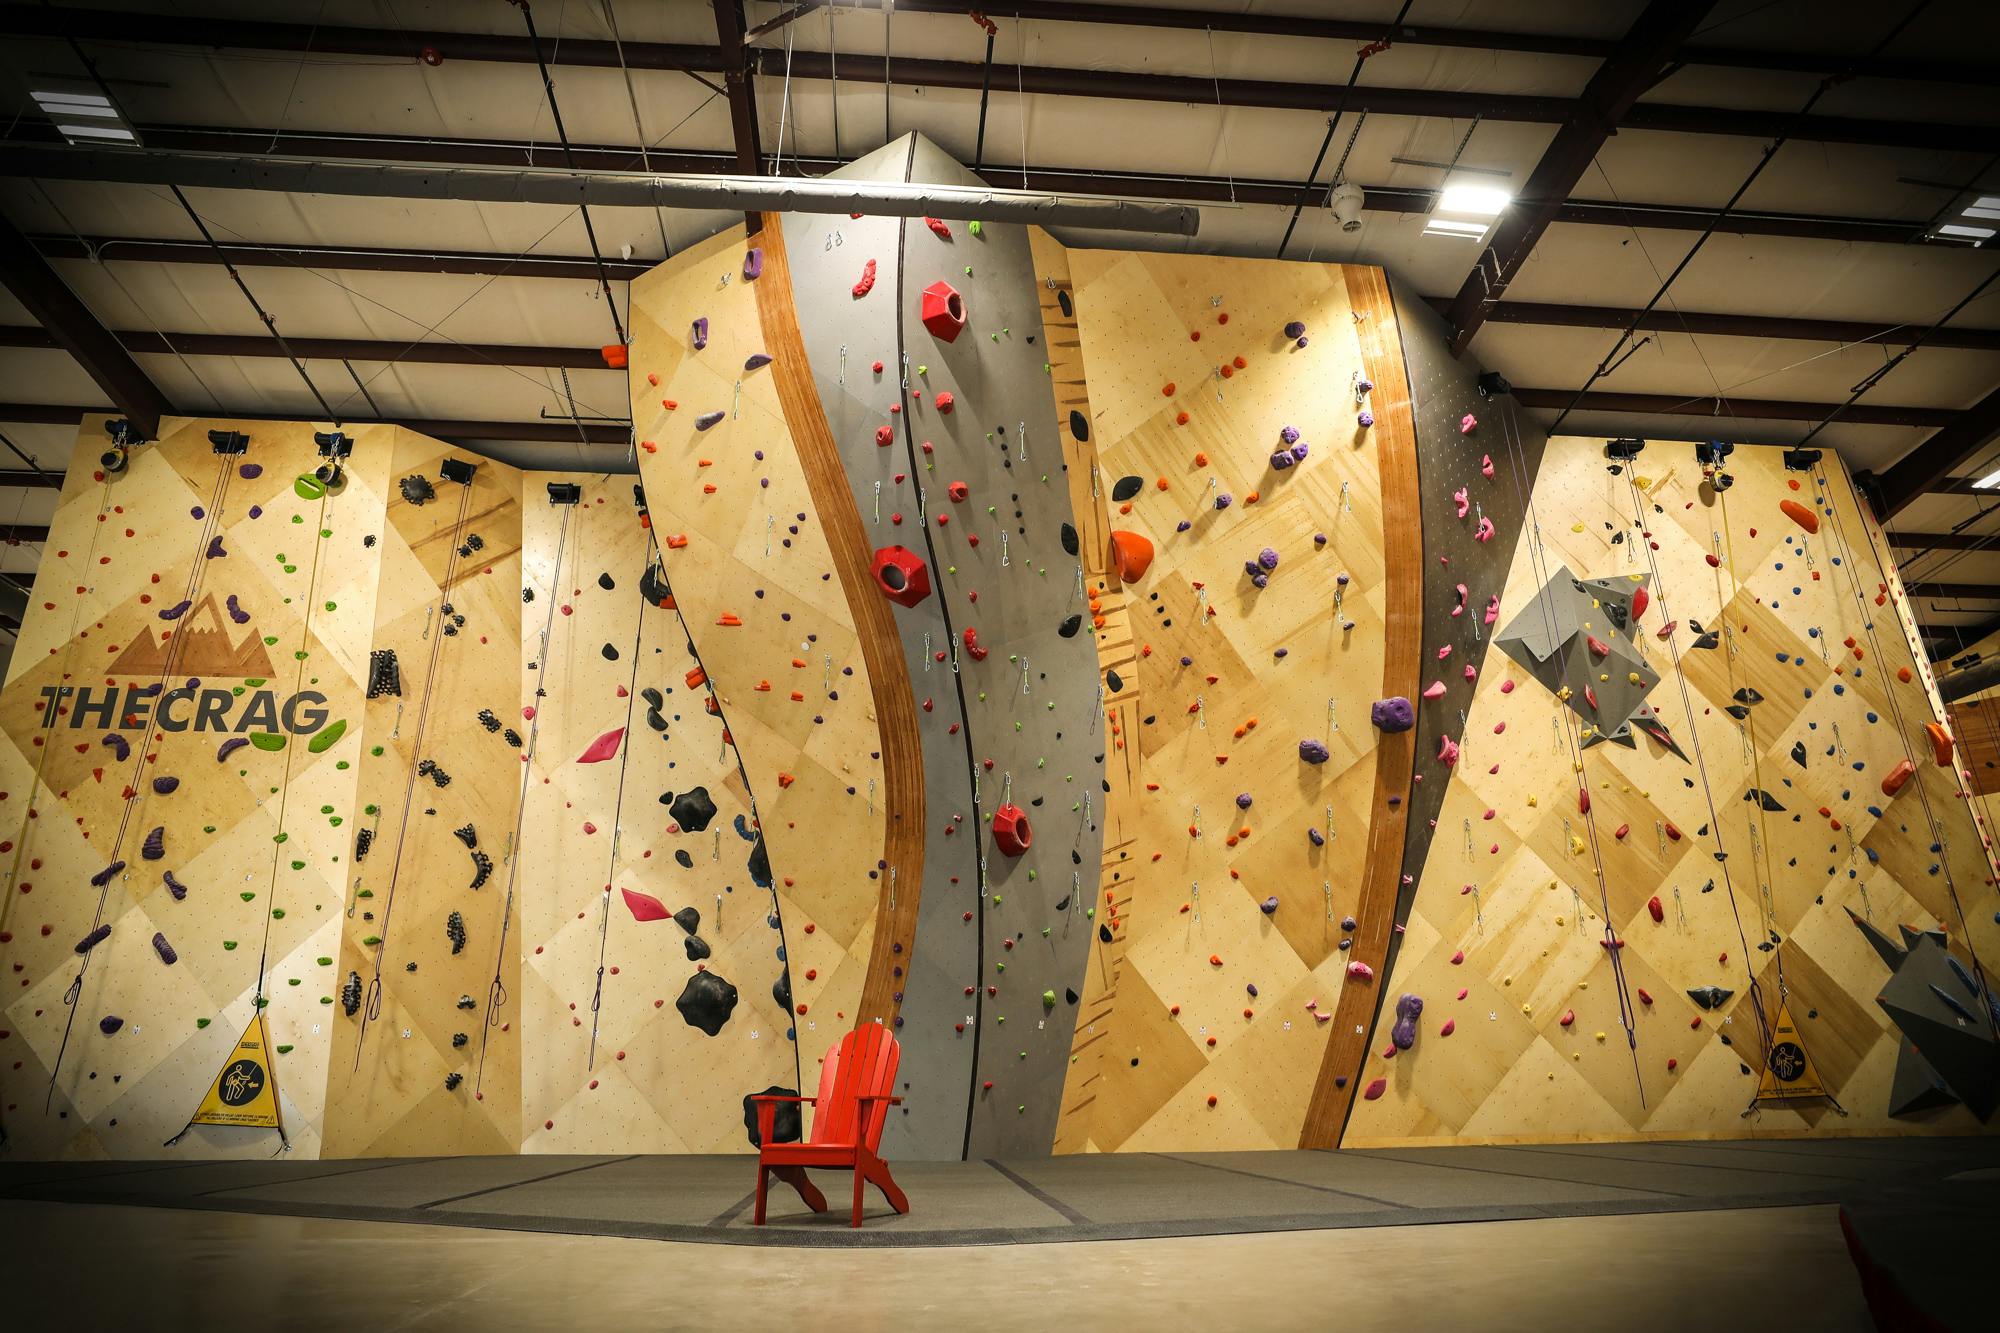 ARC climbing walls built by Vertical Solutions at The Crag Climbing Gym